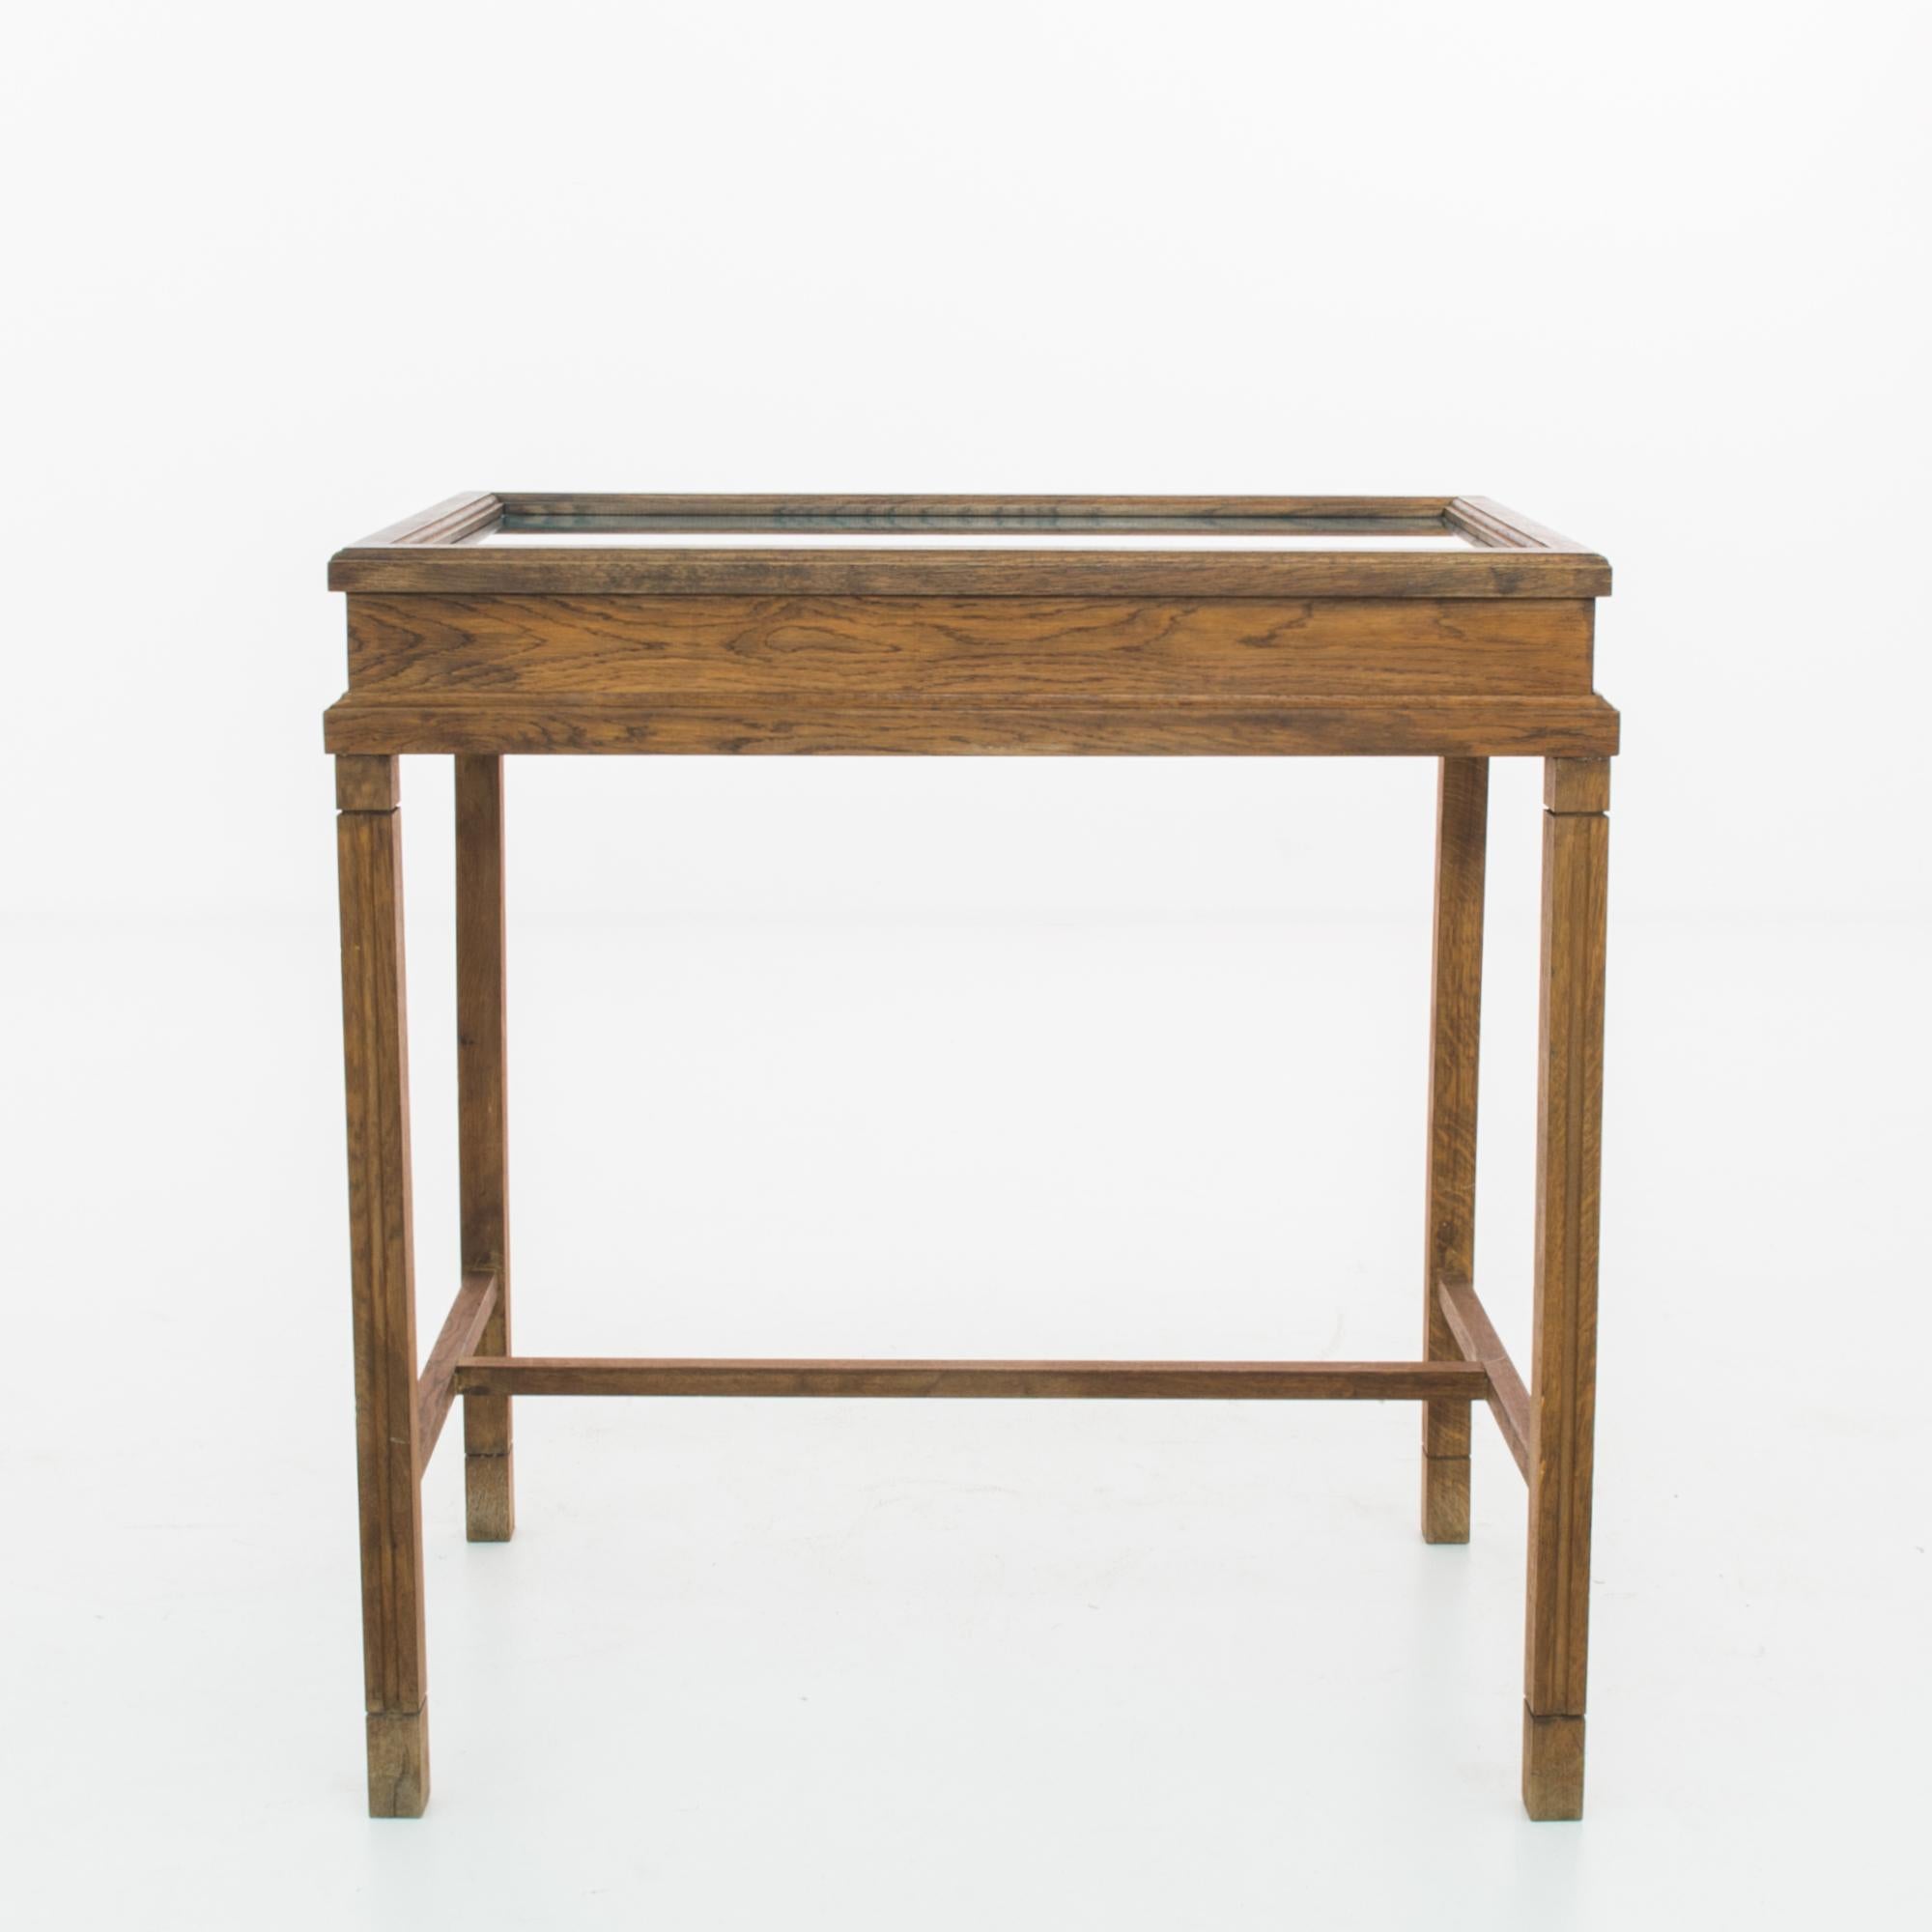 A display table from 1950s Germany. An oak display case with a glass top sits atop four slender legs, joined by an H-shaped strut. The wood has a rich brunette tone and a gentle shine; a symmetrical grain provides an organic decorative touch.